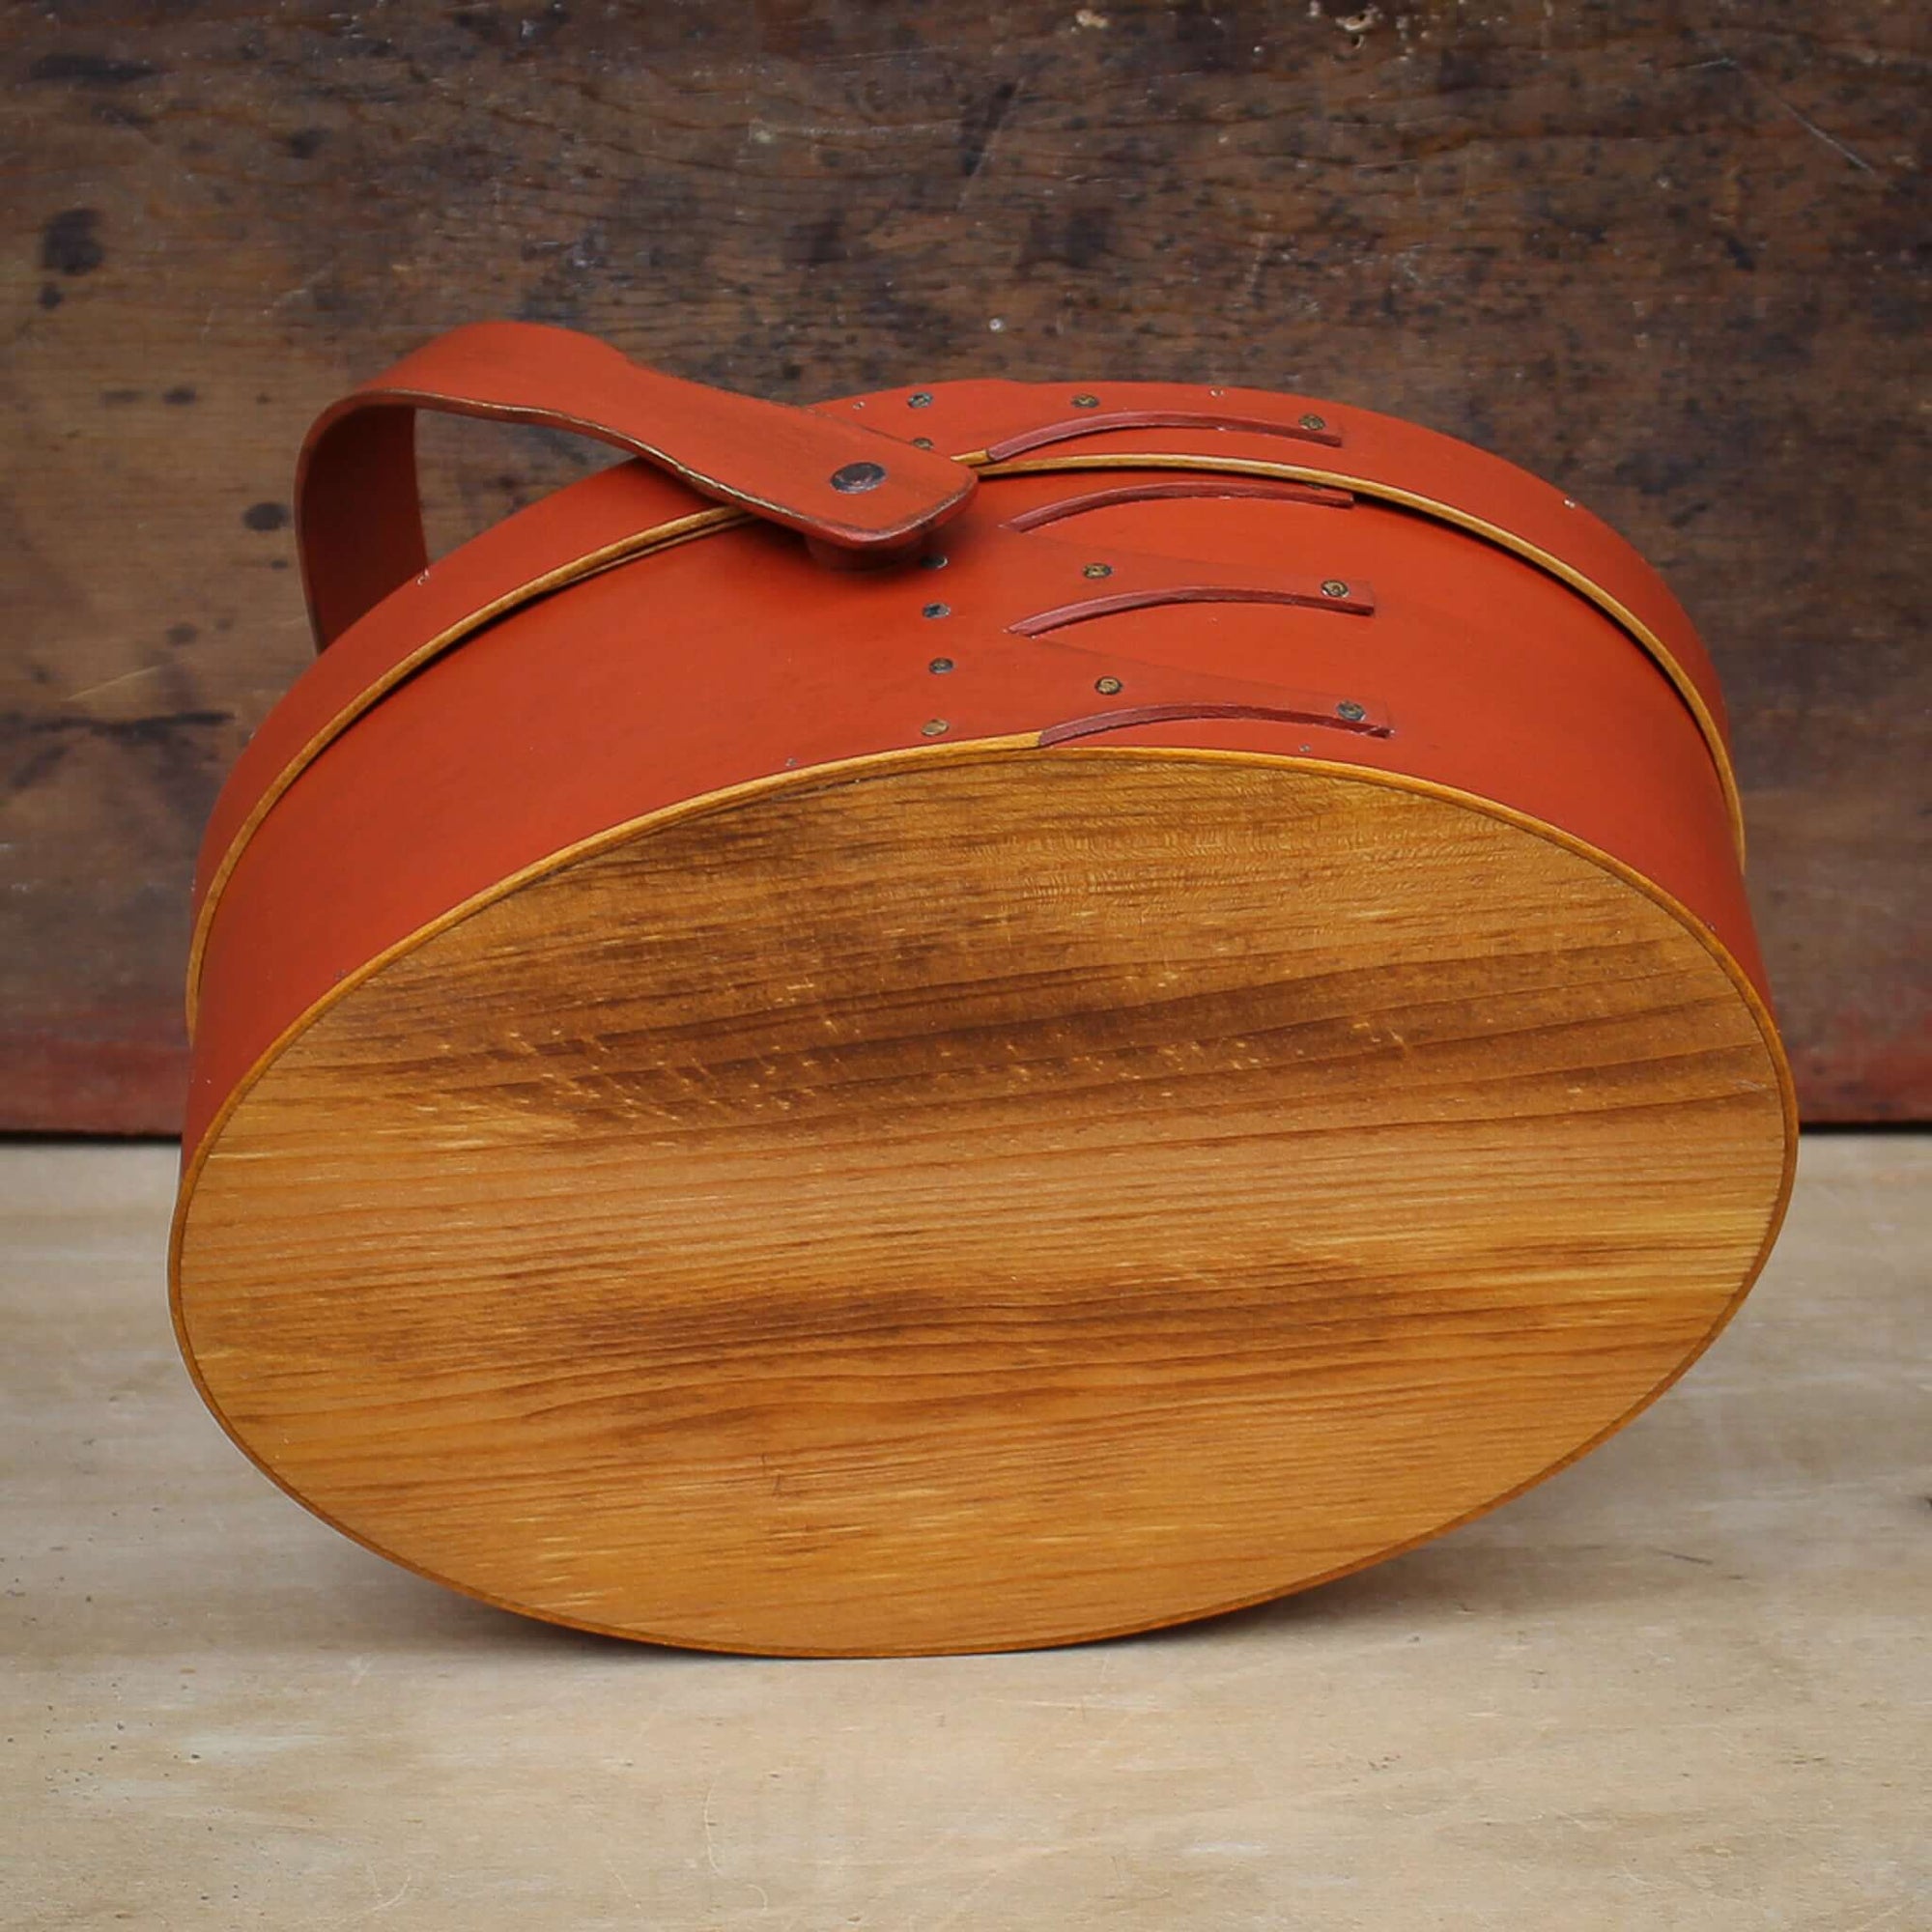 Shaker Swing Handle Carrier, LeHay's Shaker Boxes